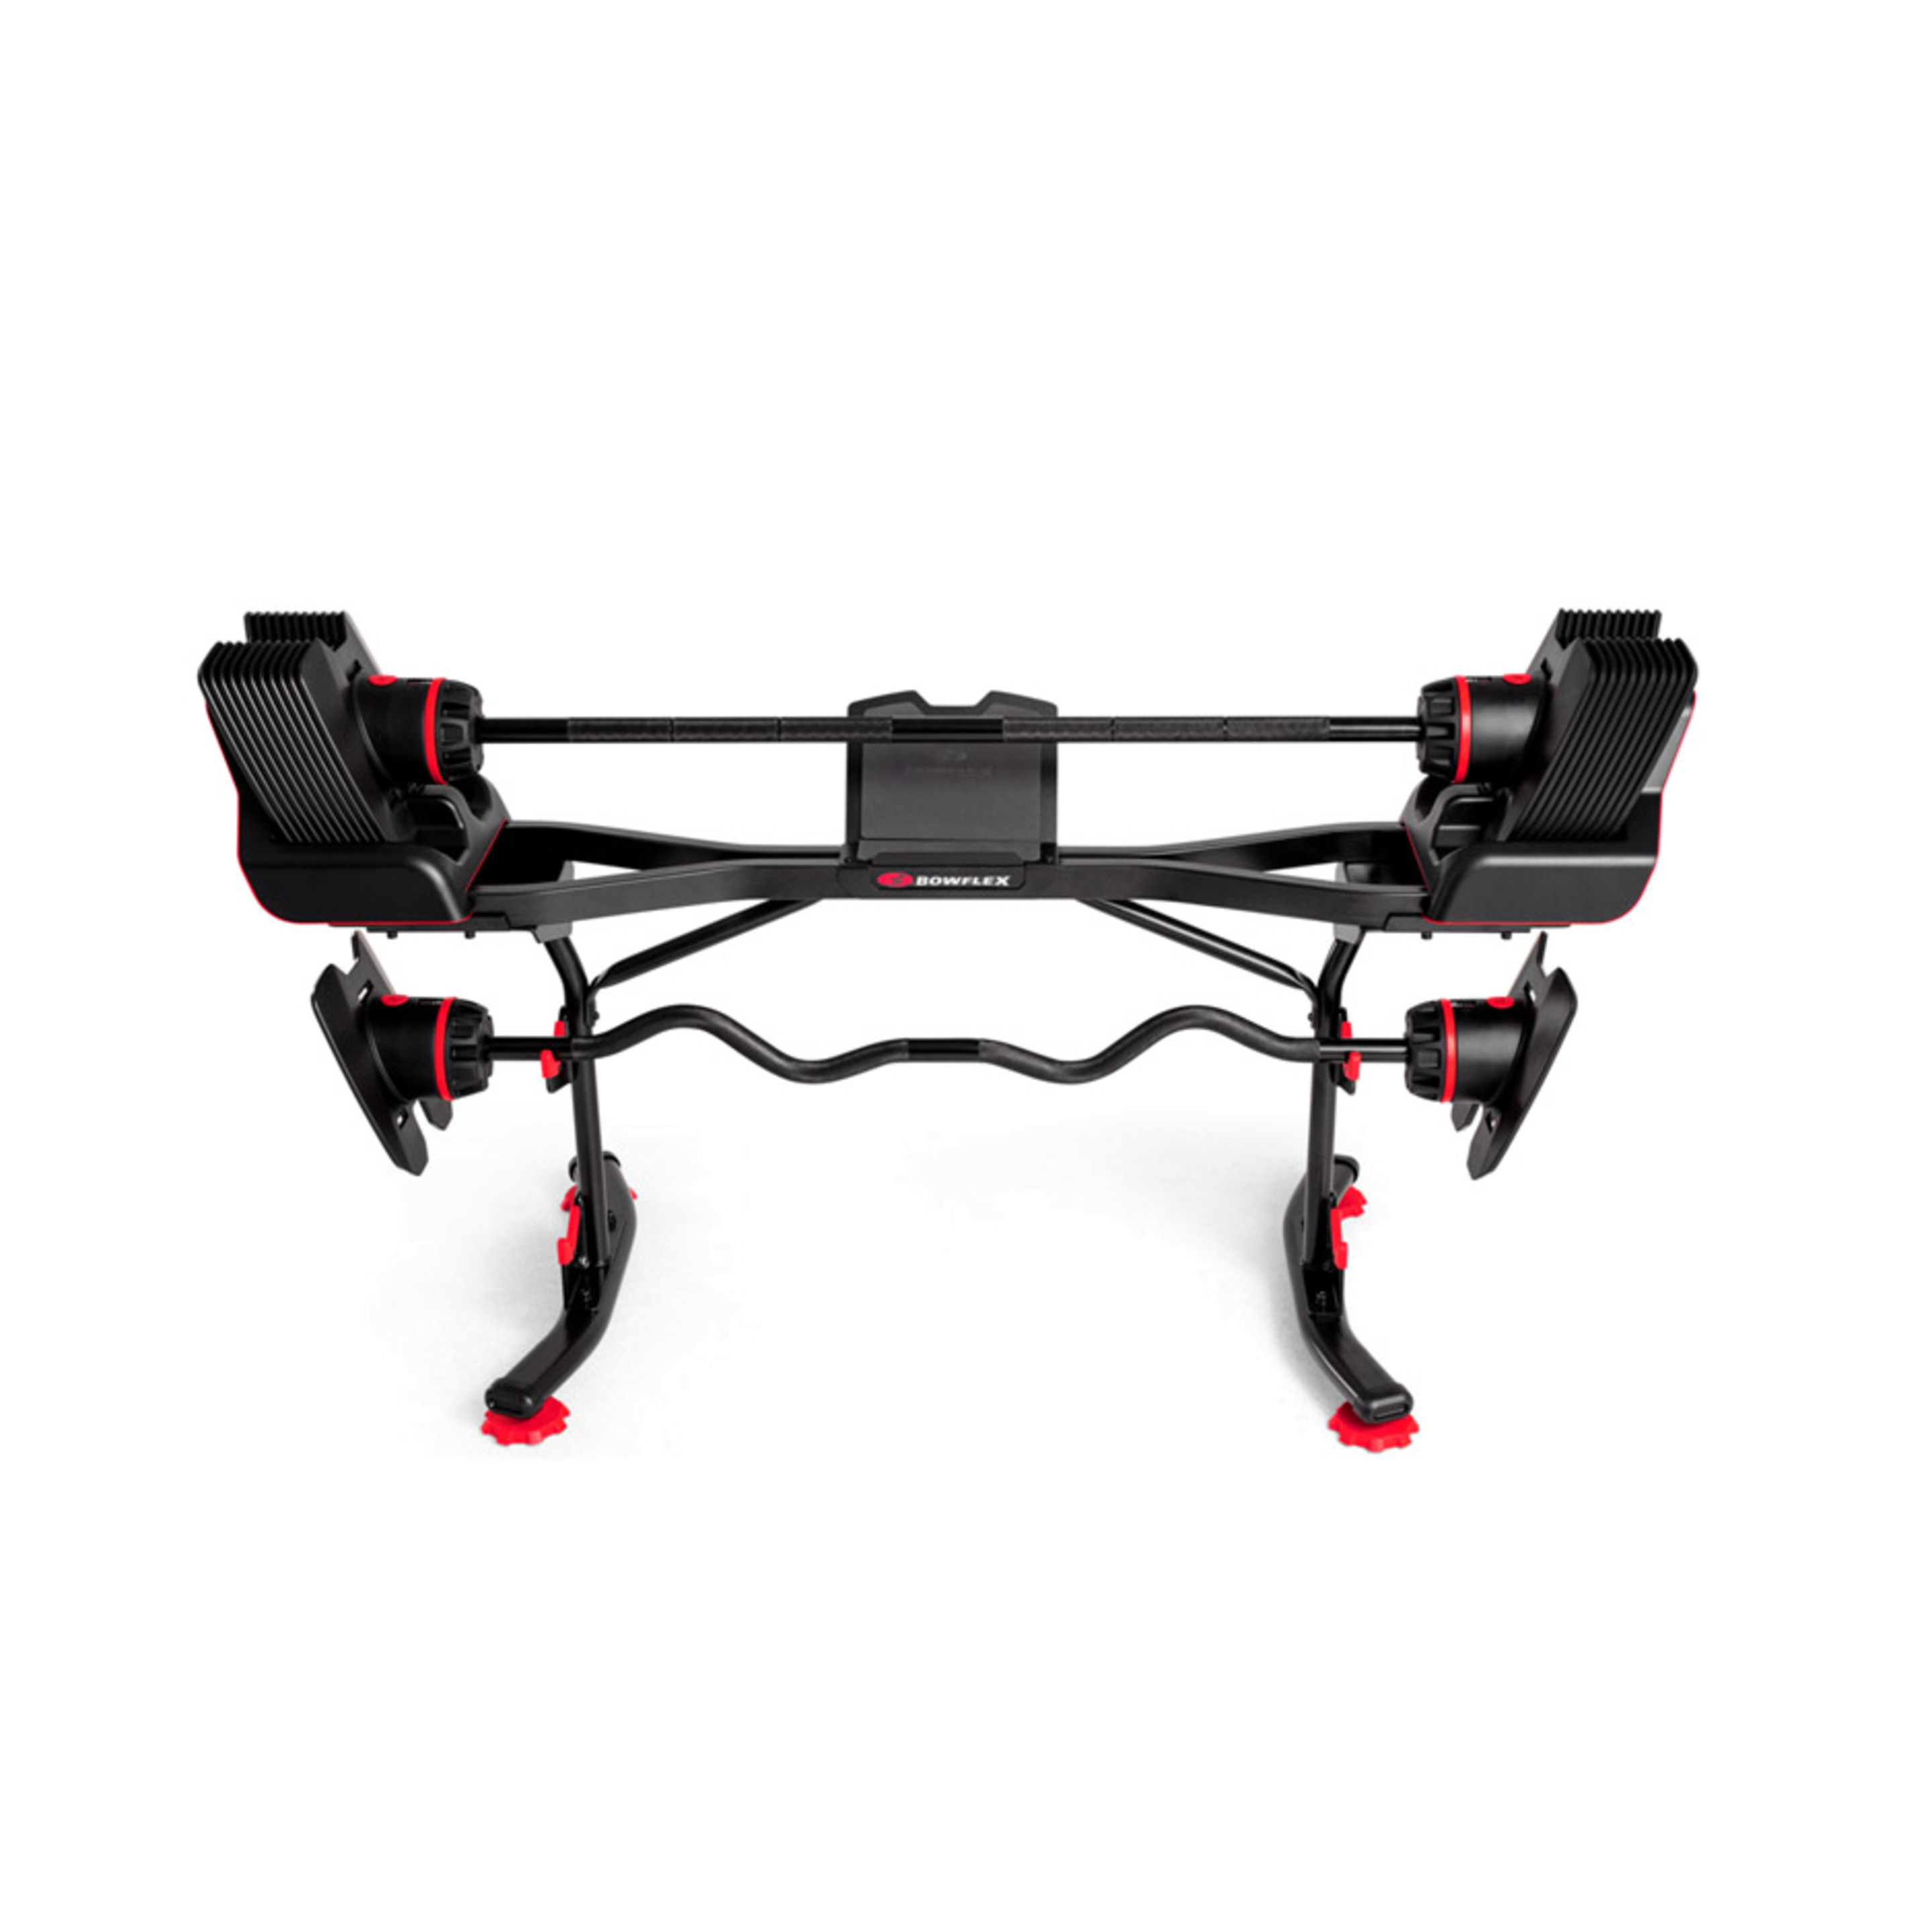 Bowflex Stand Barbell And Curlbar With Media Rack - Negro - Uso Doméstico  MKP